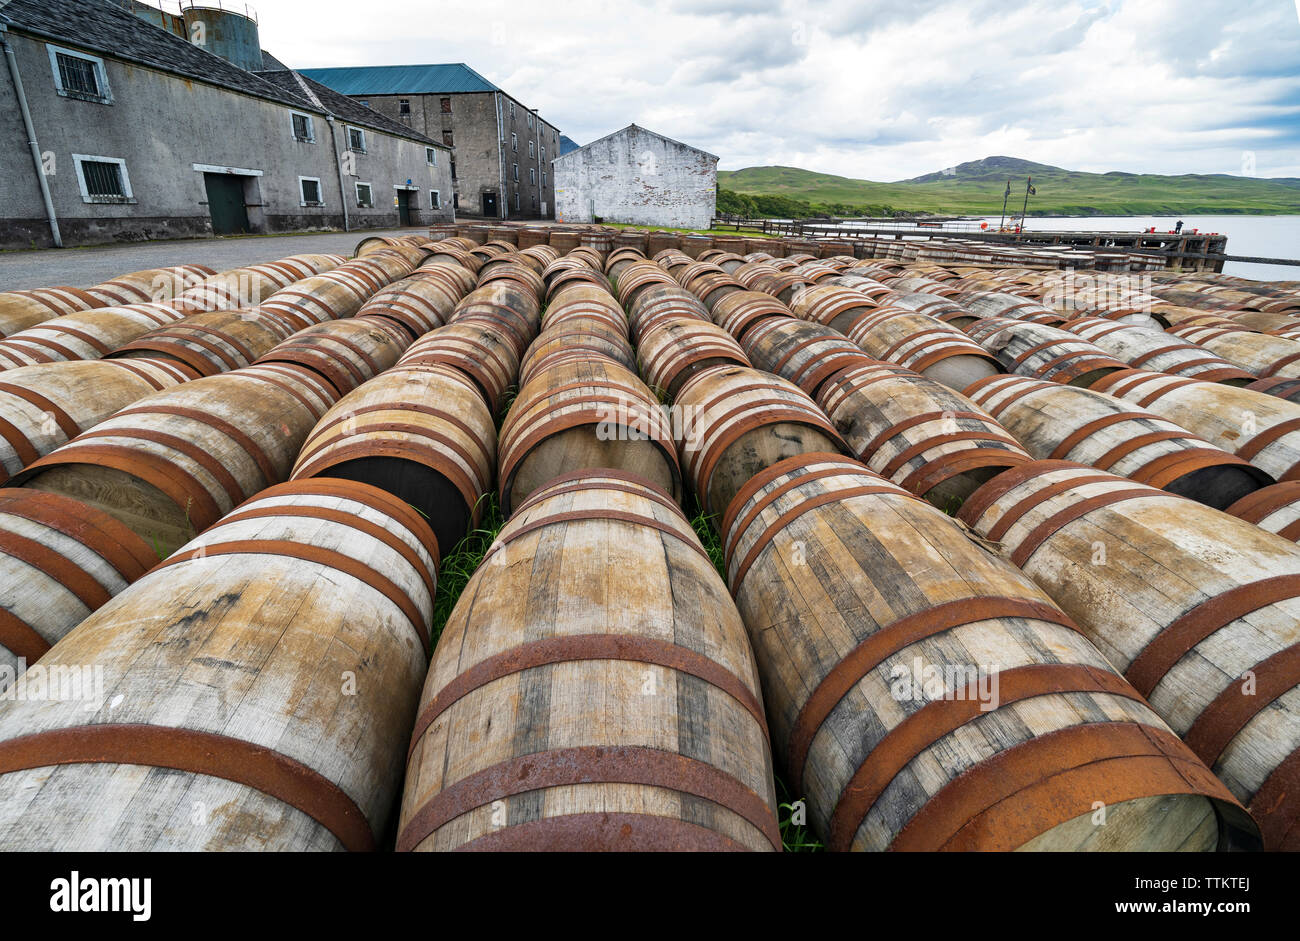 View of scotch whisky barrels at Bunnahabhain Distillery on island of Islay in Inner Hebrides of Scotland, UK Stock Photo